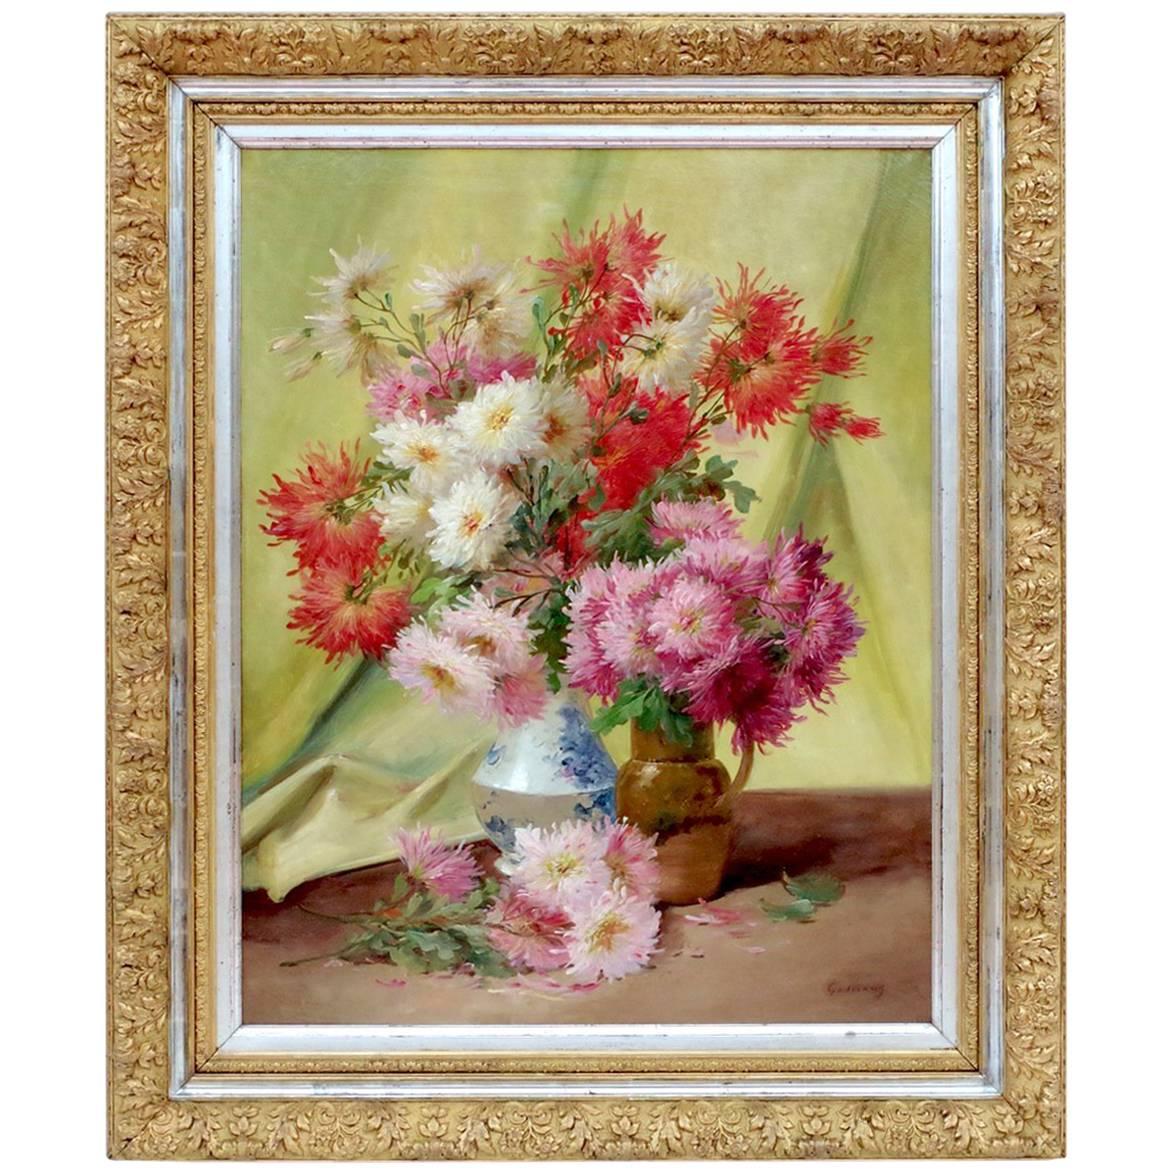 Oil on Canvas Bouquets of Flowers Signed Godchaux, circa 1900